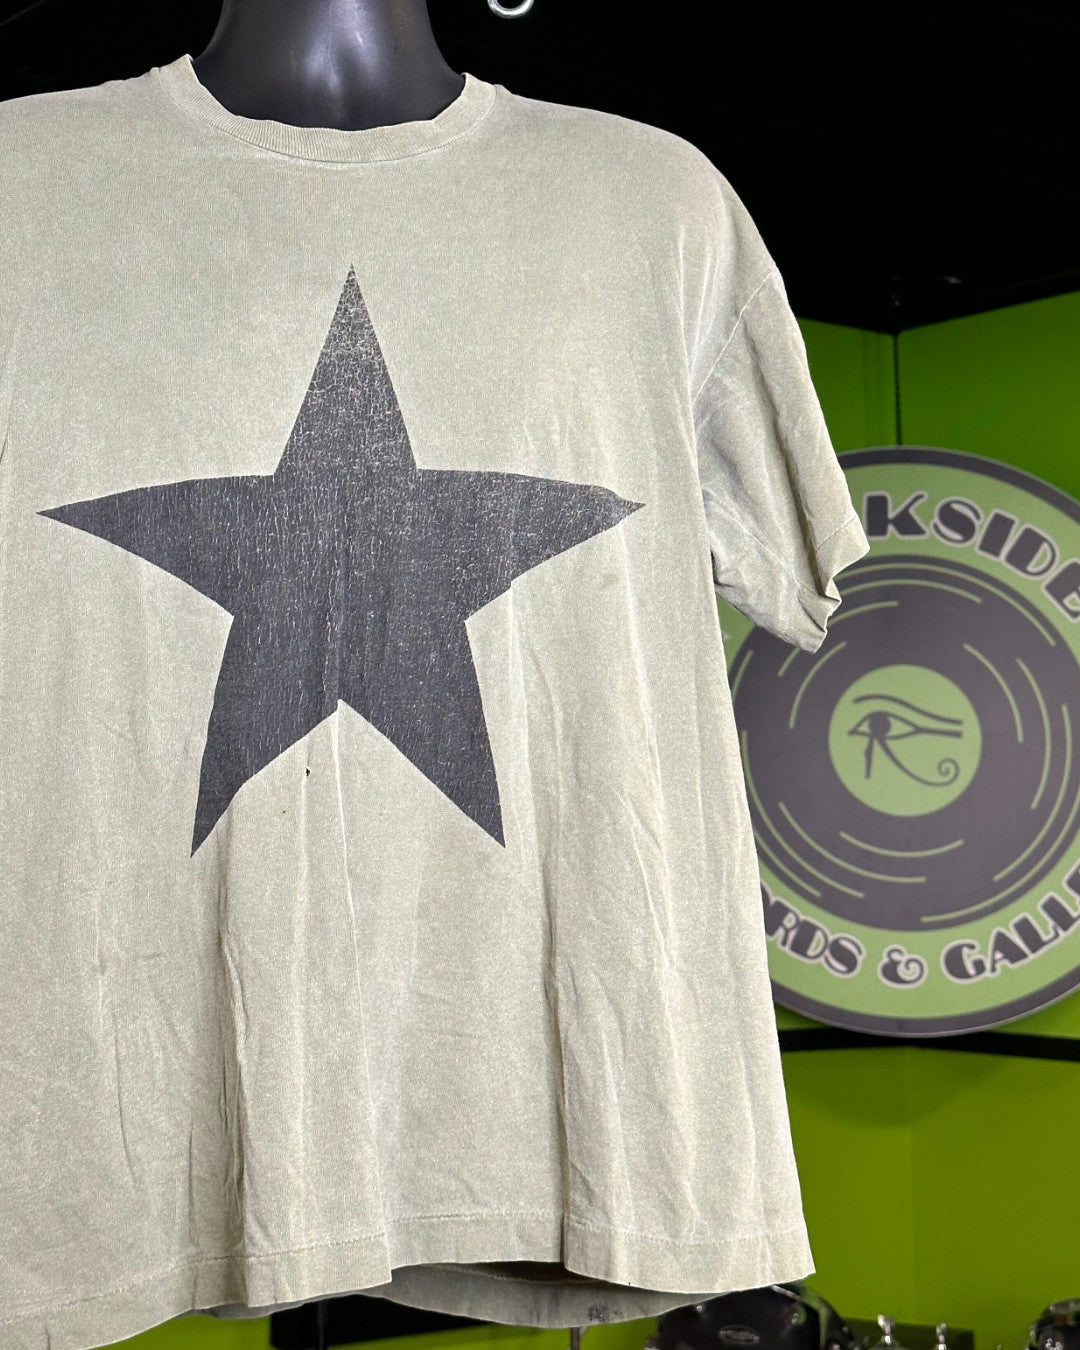 R.E.M. 1995 Star Logo T-Shirt, Army Green, XL (Faded, Cracking) - Darkside Records